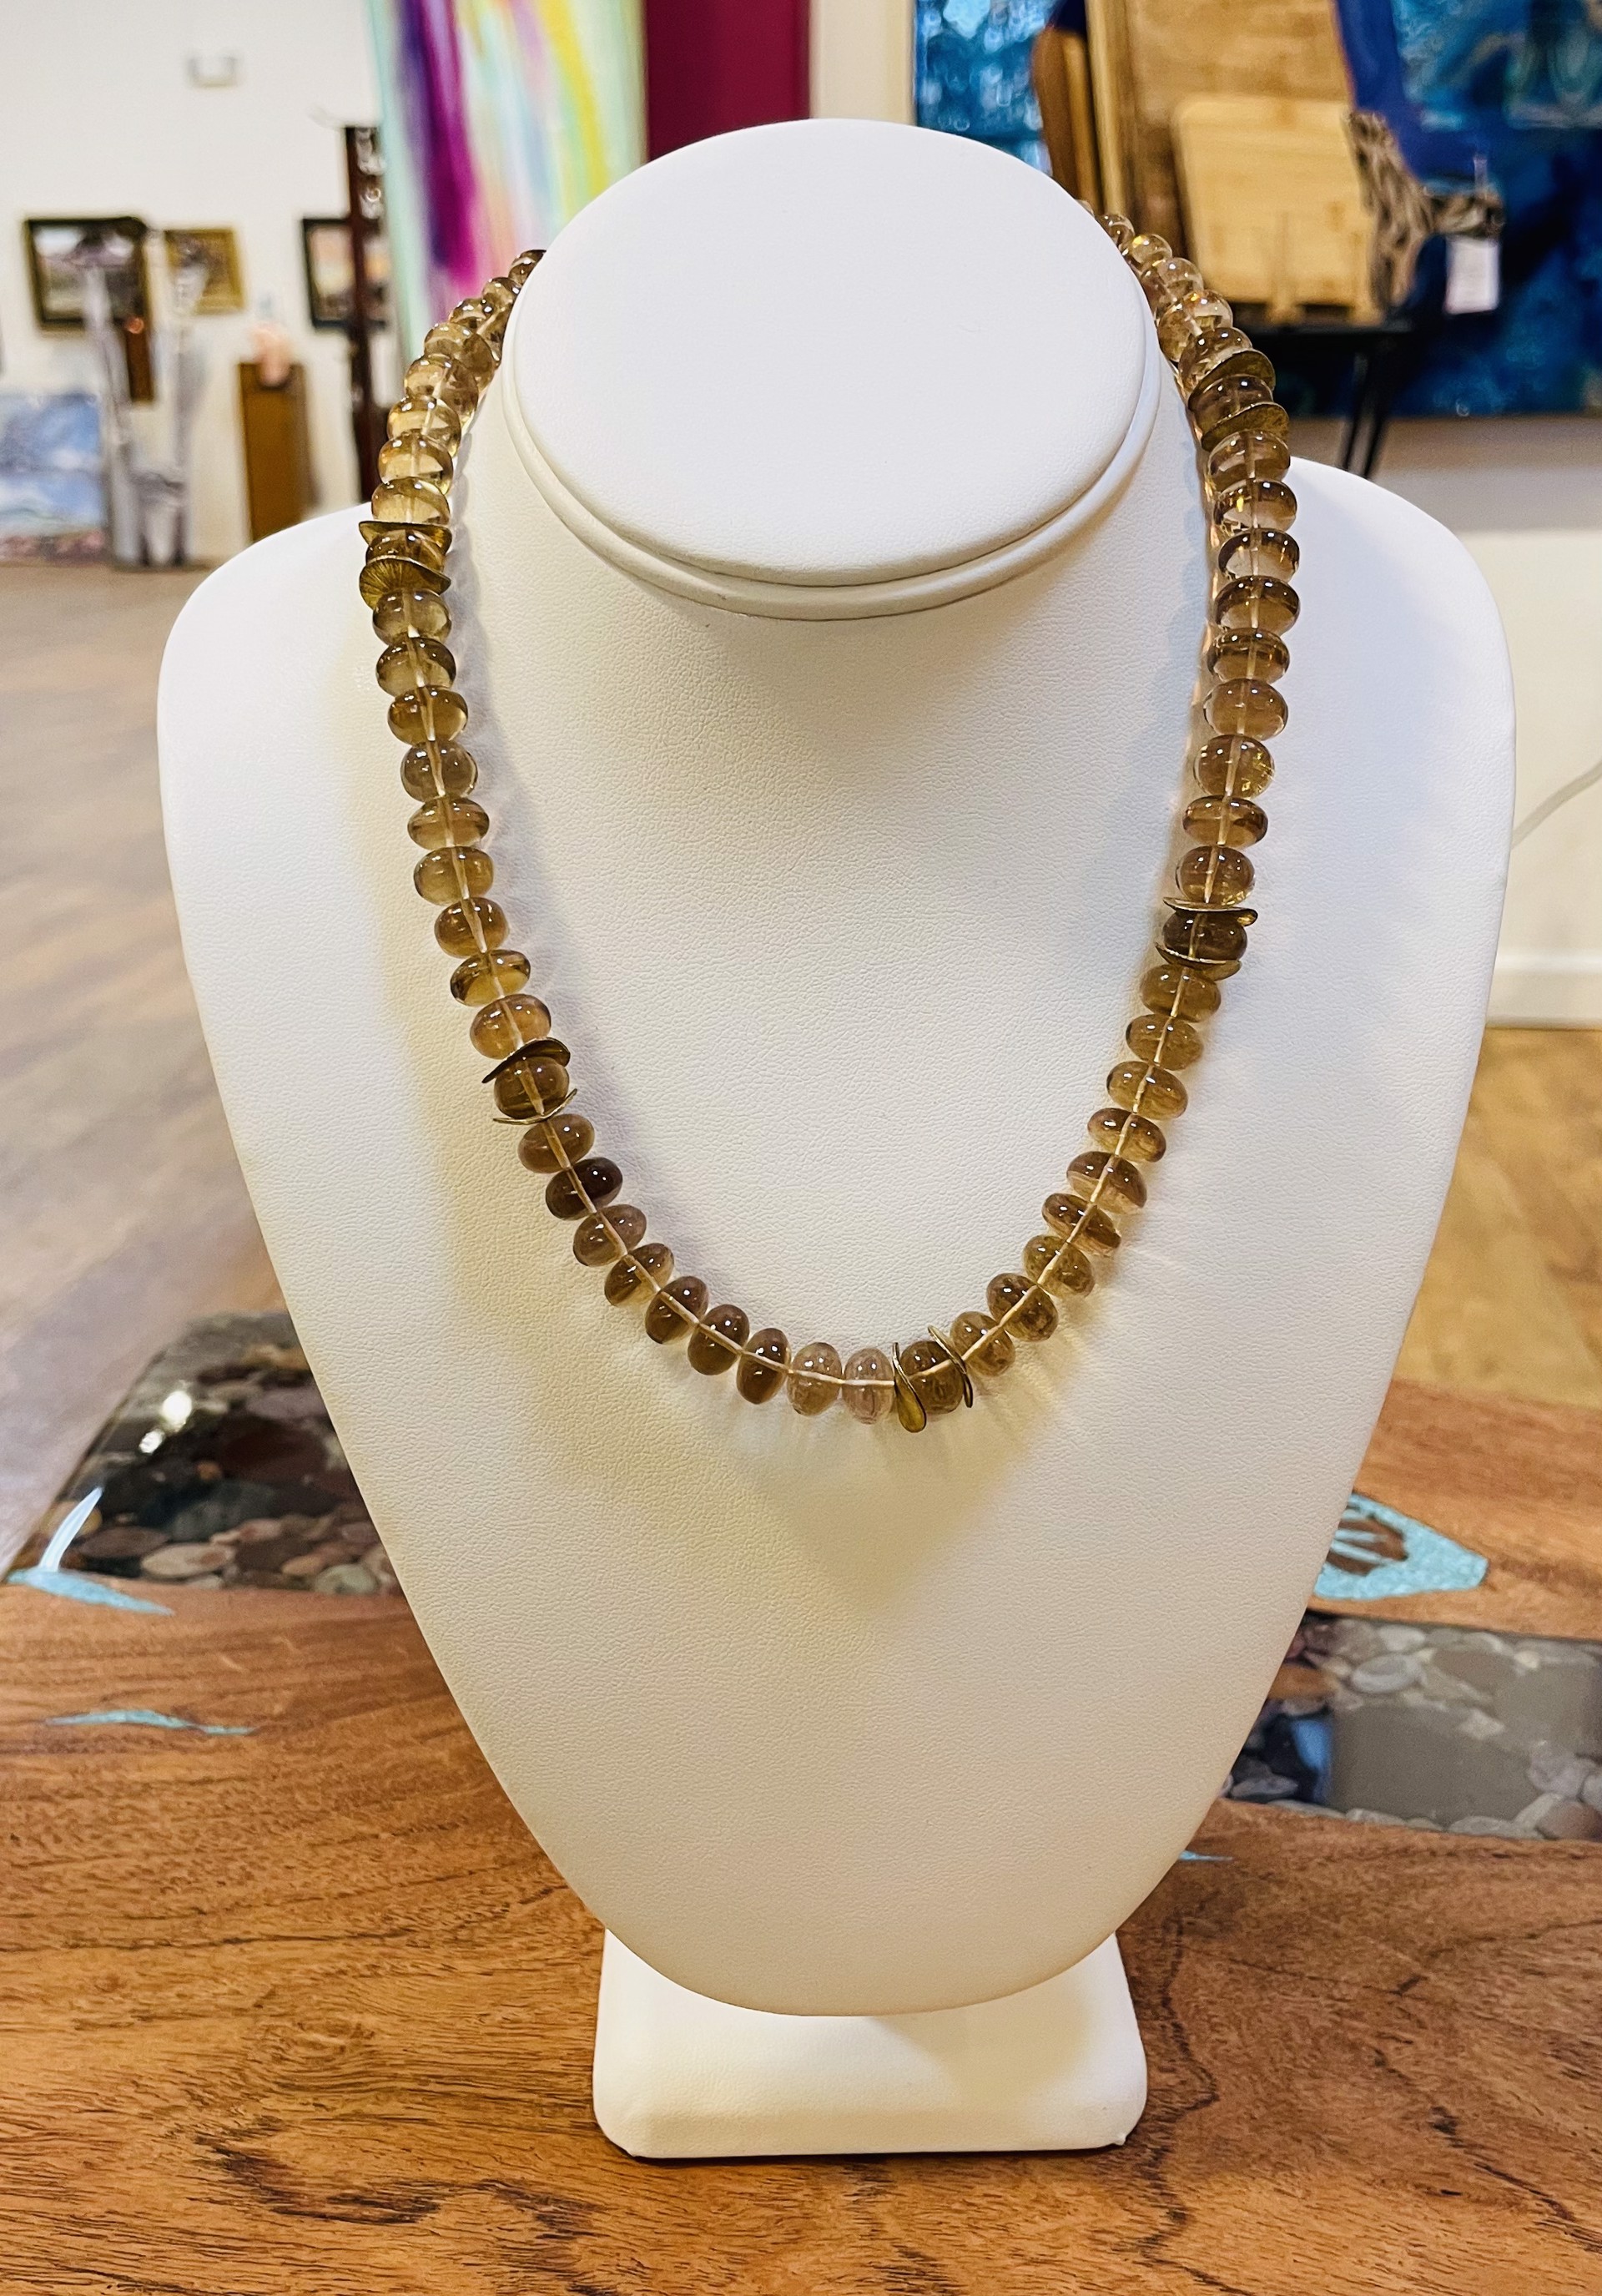 Necklace - Whiskey Smoked Quartz And Gold Vermeil by Bonnie Jaus